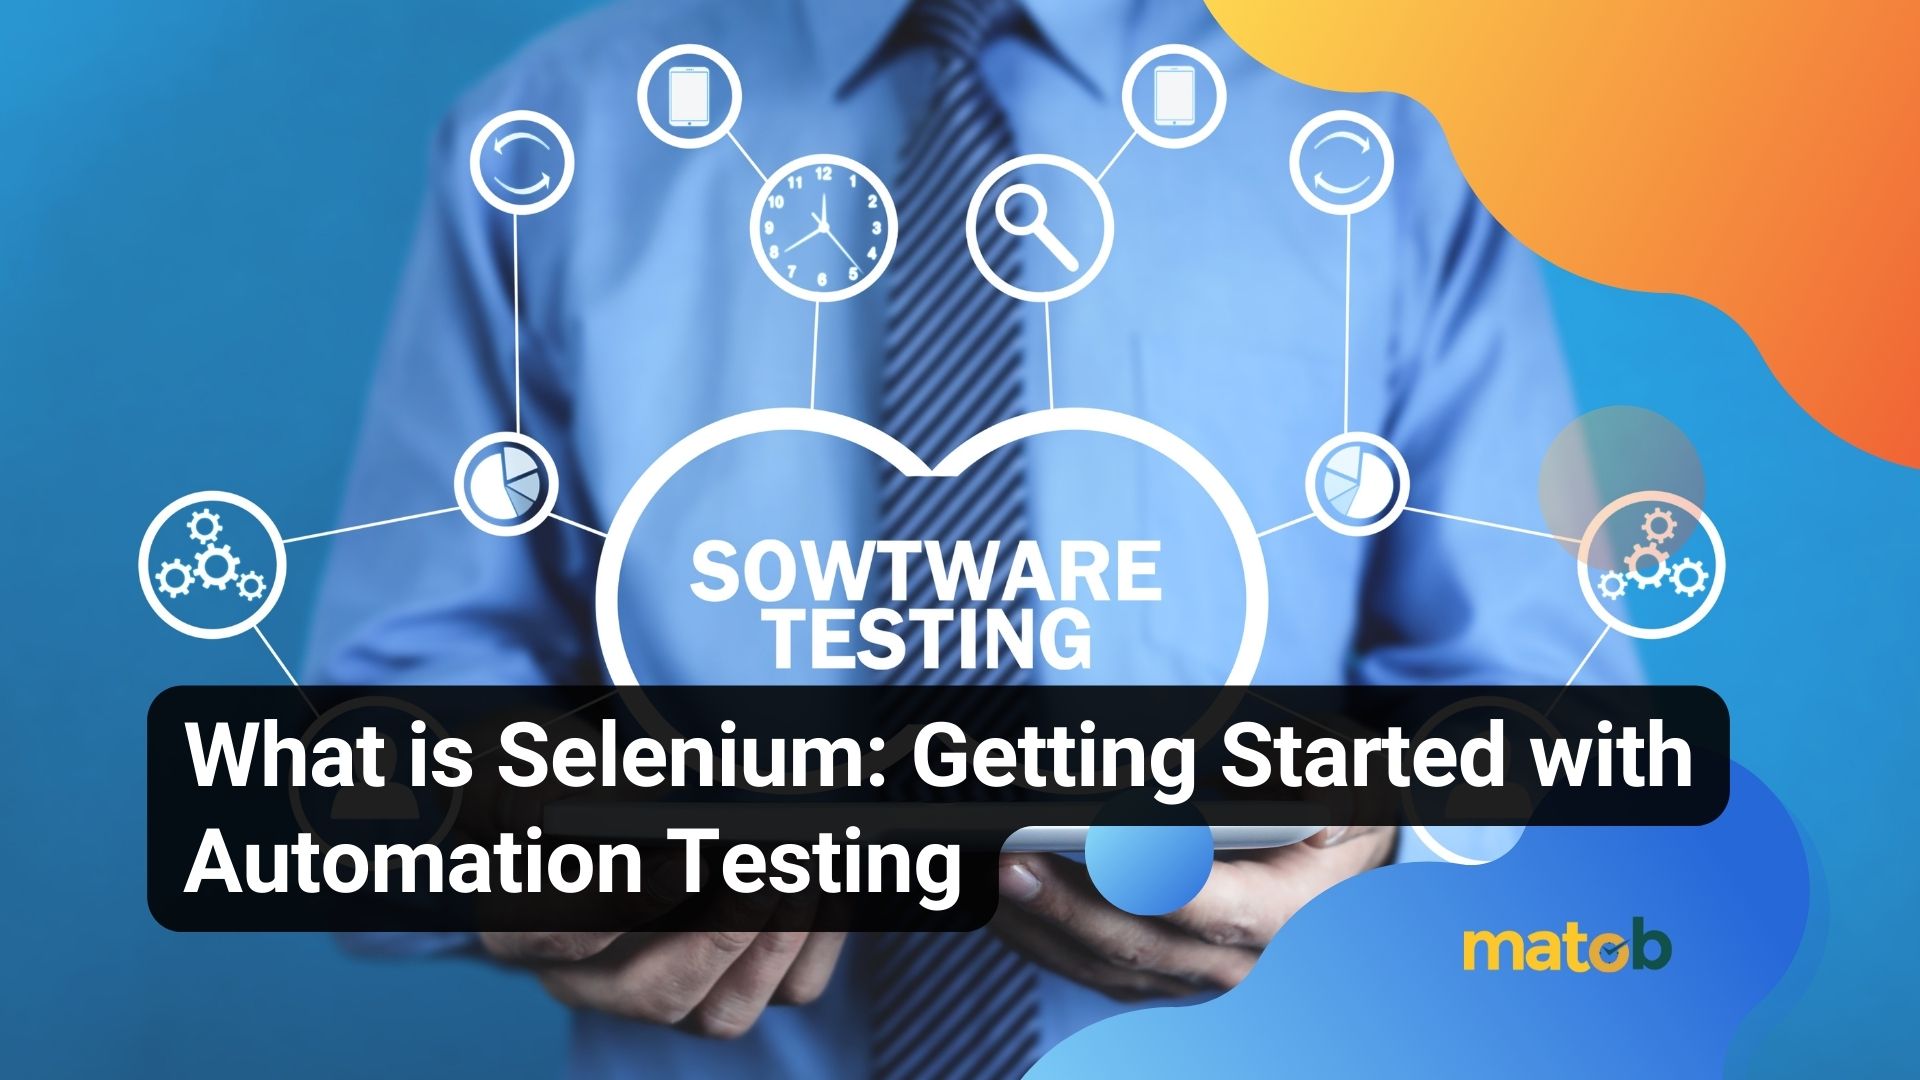 What is Selenium: Getting Started with Automation Testing